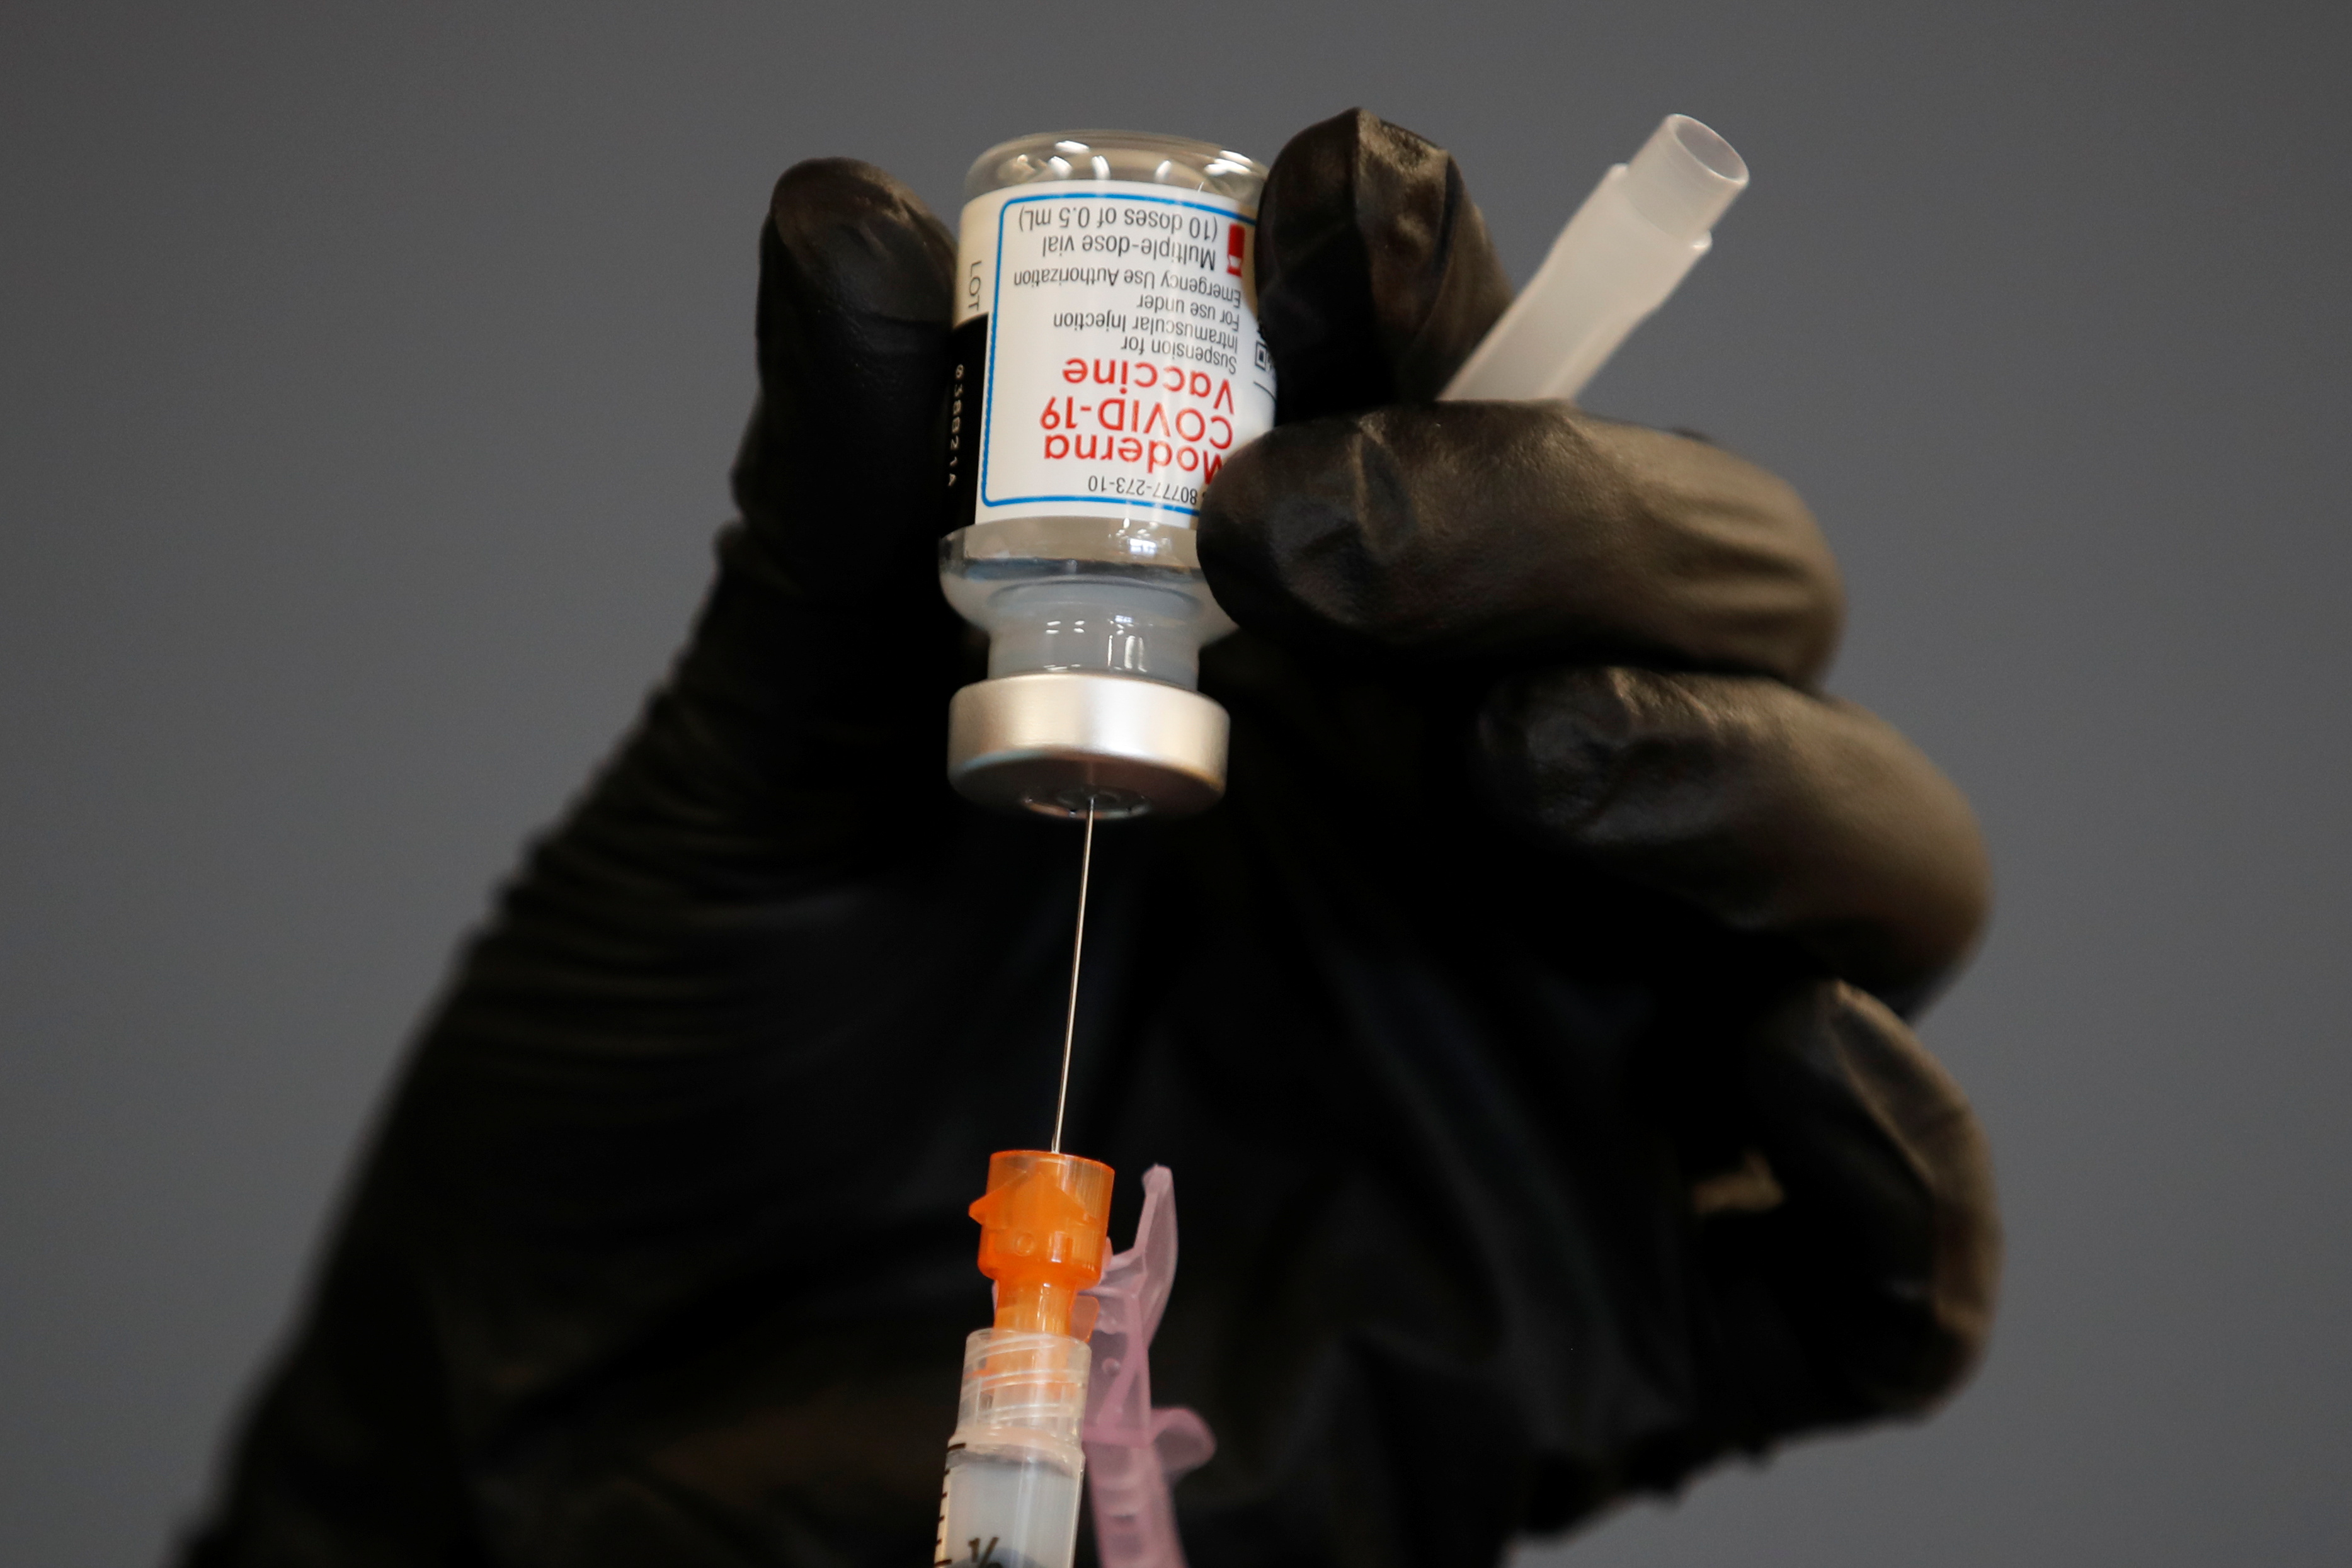 A health care worker fills a syringe with Moderna COVID-19 vaccine as California opens up vaccine eligibility to any residents 16 years and older during the outbreak of coronavirus disease (COVID-19) in Chula Vista, California, U.S., April 15, 2021. REUTERS/Mike Blake